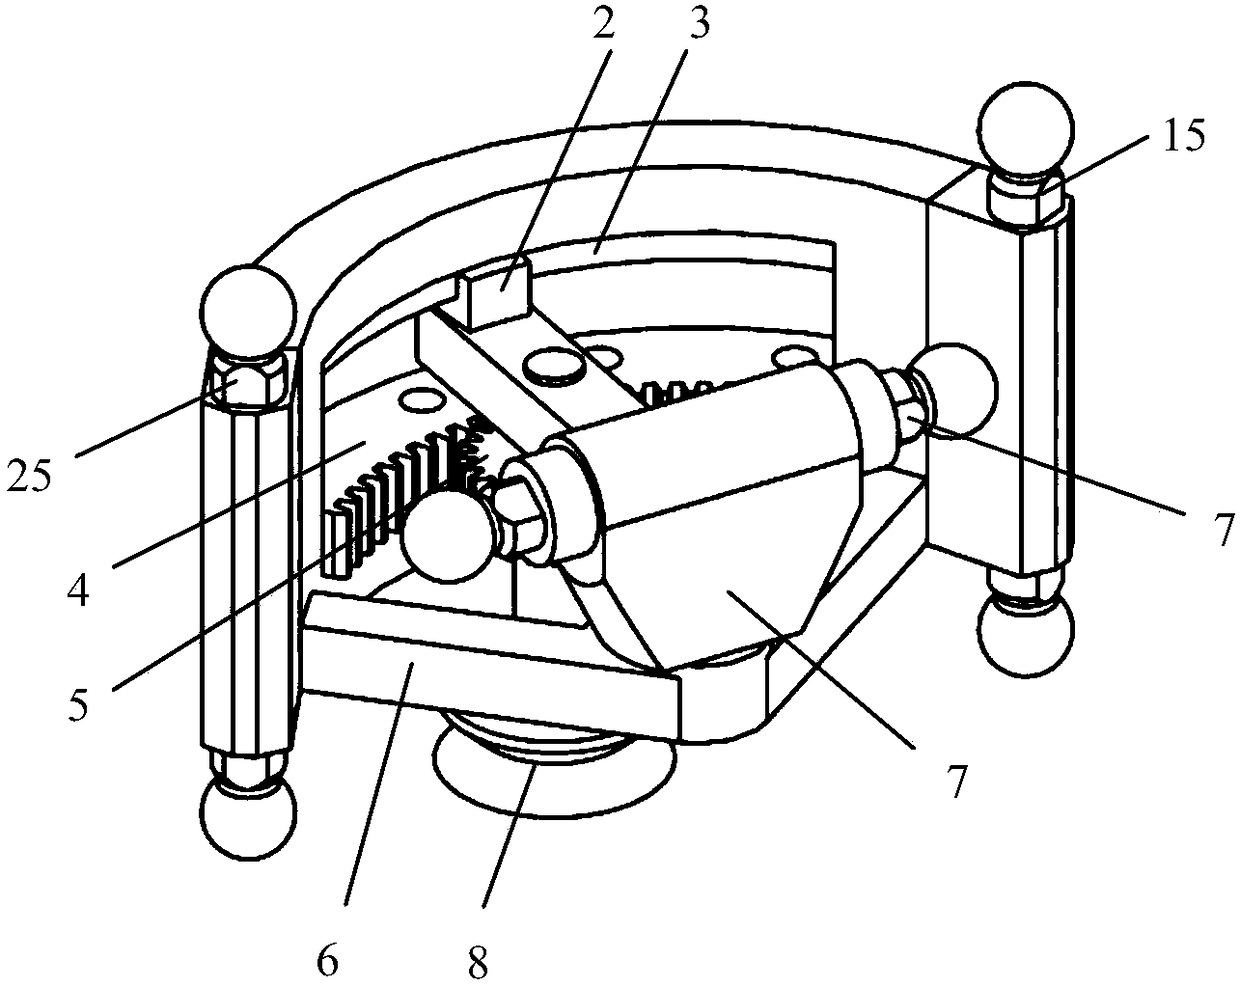 A three-degree-of-freedom robot mechanism capable of realizing two levels and one rotation